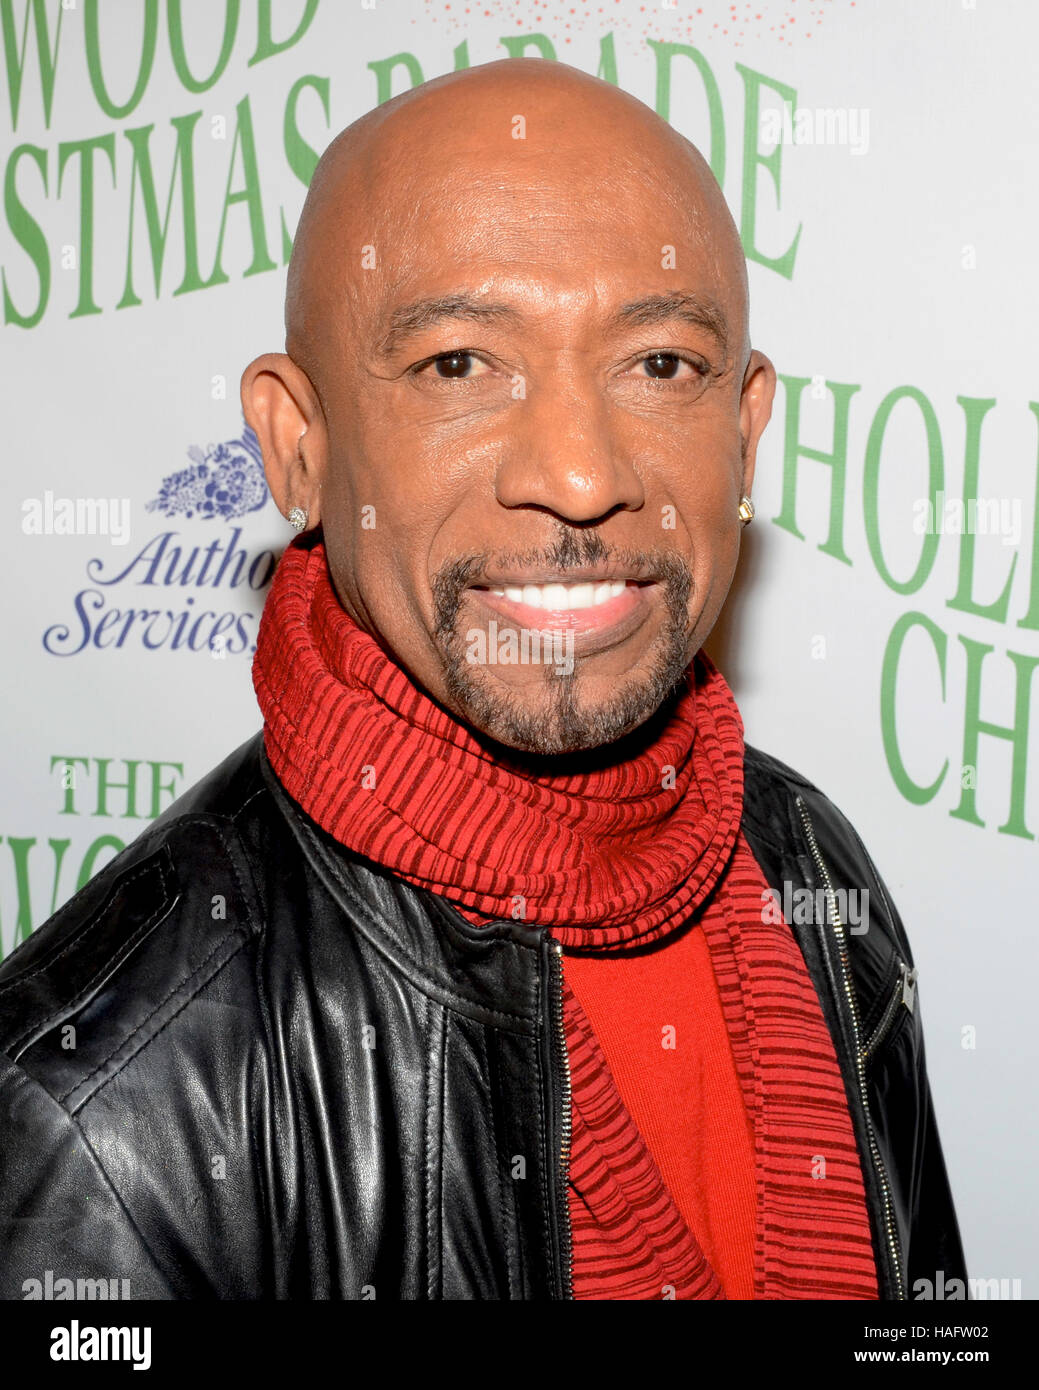 Montel Williams arrives at the 85th Annual Hollywood Christmas Parade in Hollywood on Hollywood Boulevard on November 27, 2016. Stock Photo